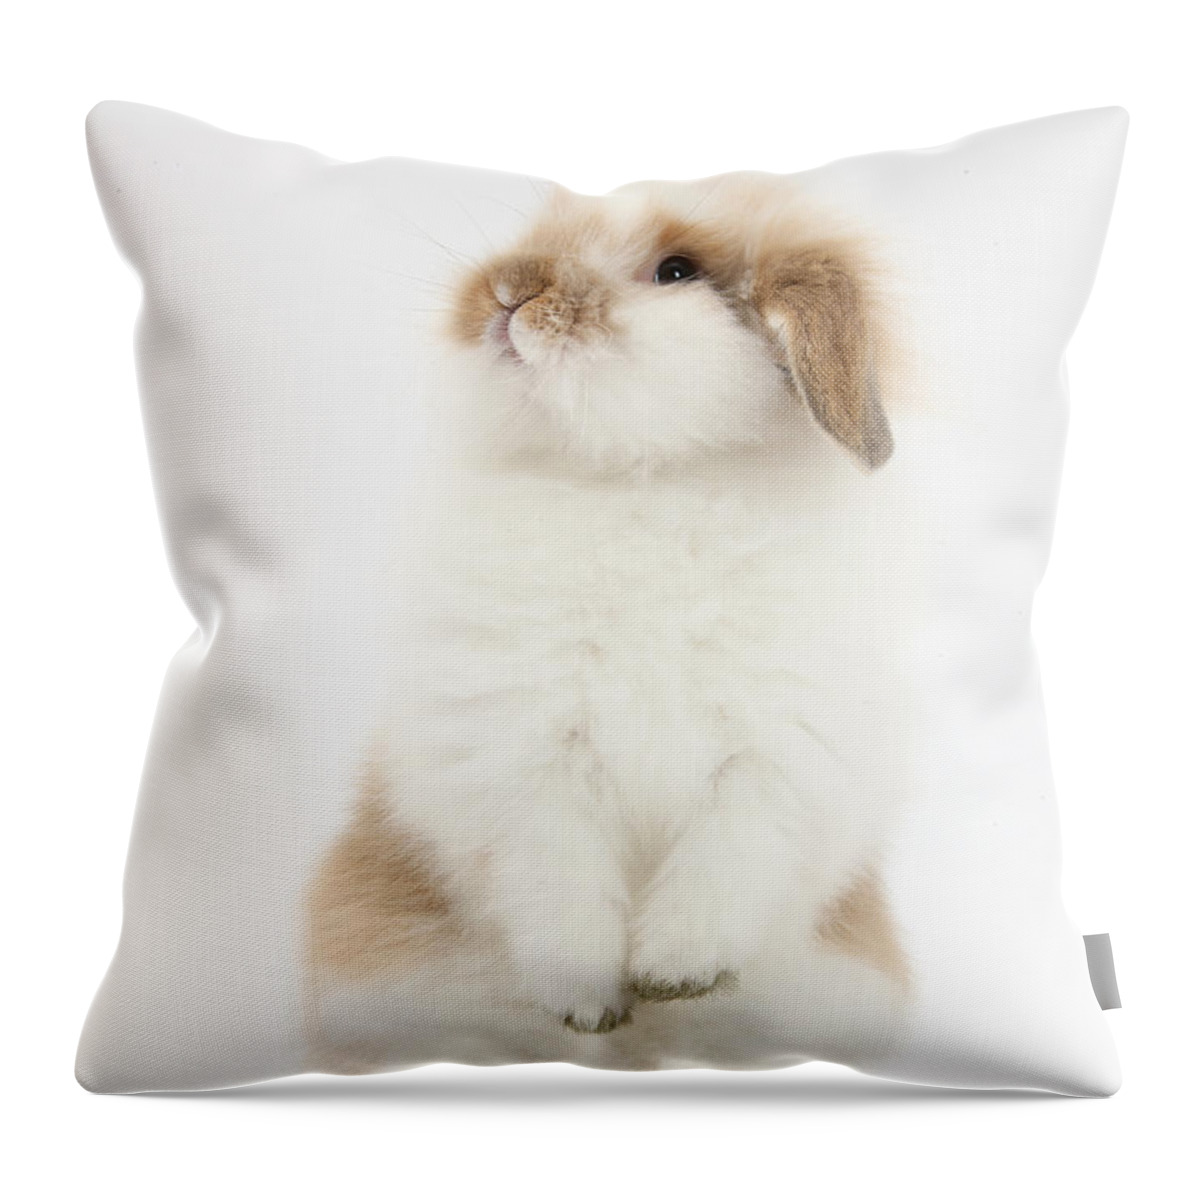 Nature Throw Pillow featuring the photograph Young Fluffy Rabbit Standing Up by Mark Taylor